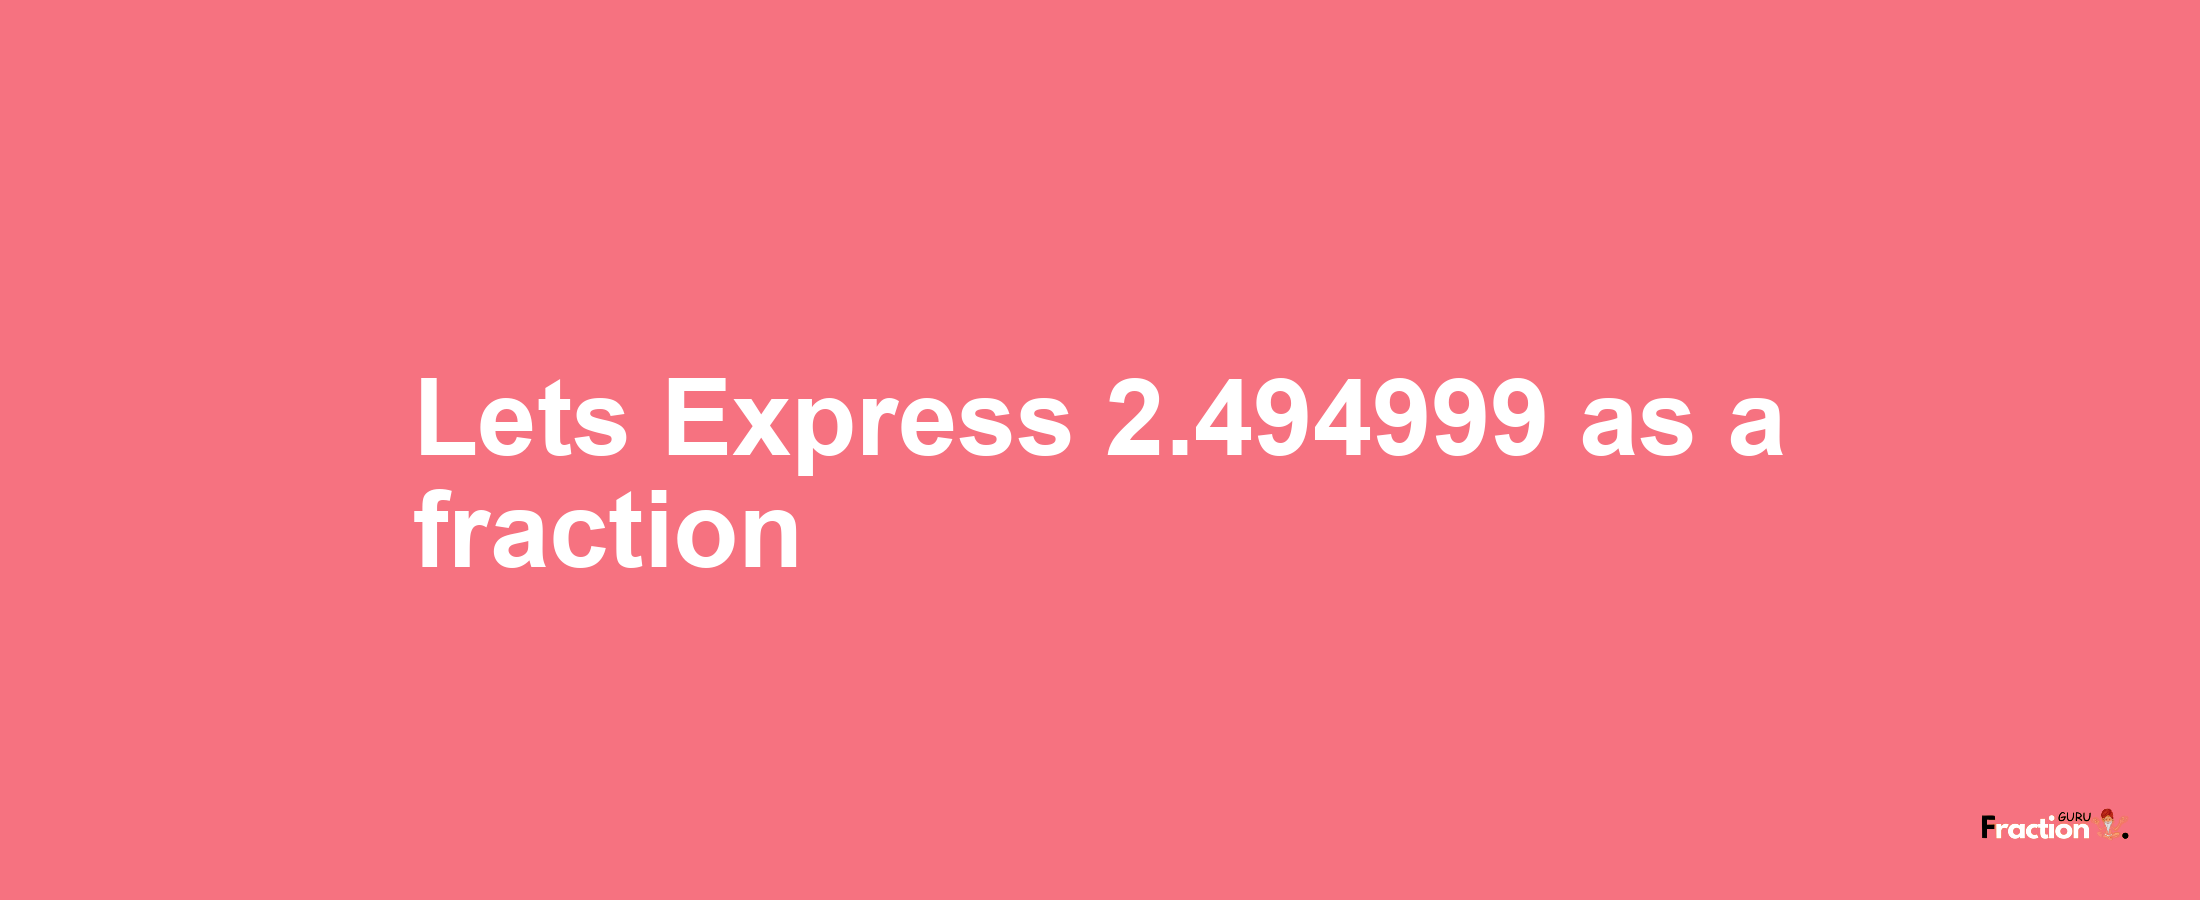 Lets Express 2.494999 as afraction